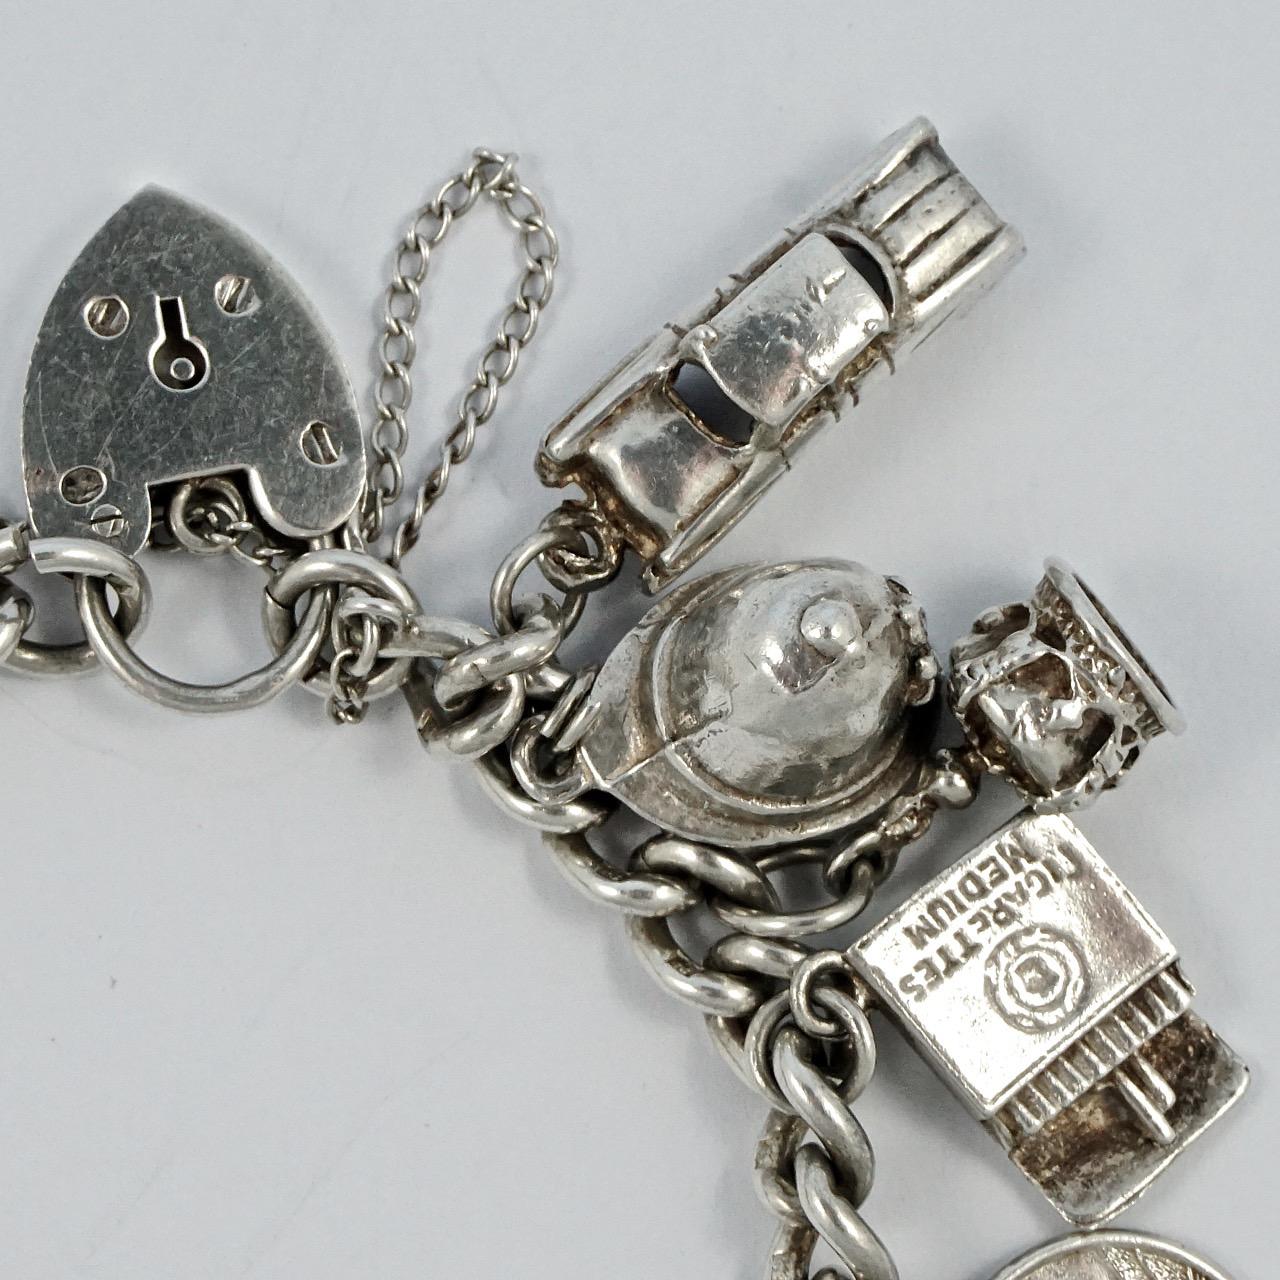 Delightful English sterling silver charm bracelet with a heart lock and chain. There are nineteen charms: a car, police helmet, crown, cigarettes, St. Christopher, coffee pot, cash register, sundial, shoes, nude lady holding flowers, lion's head,